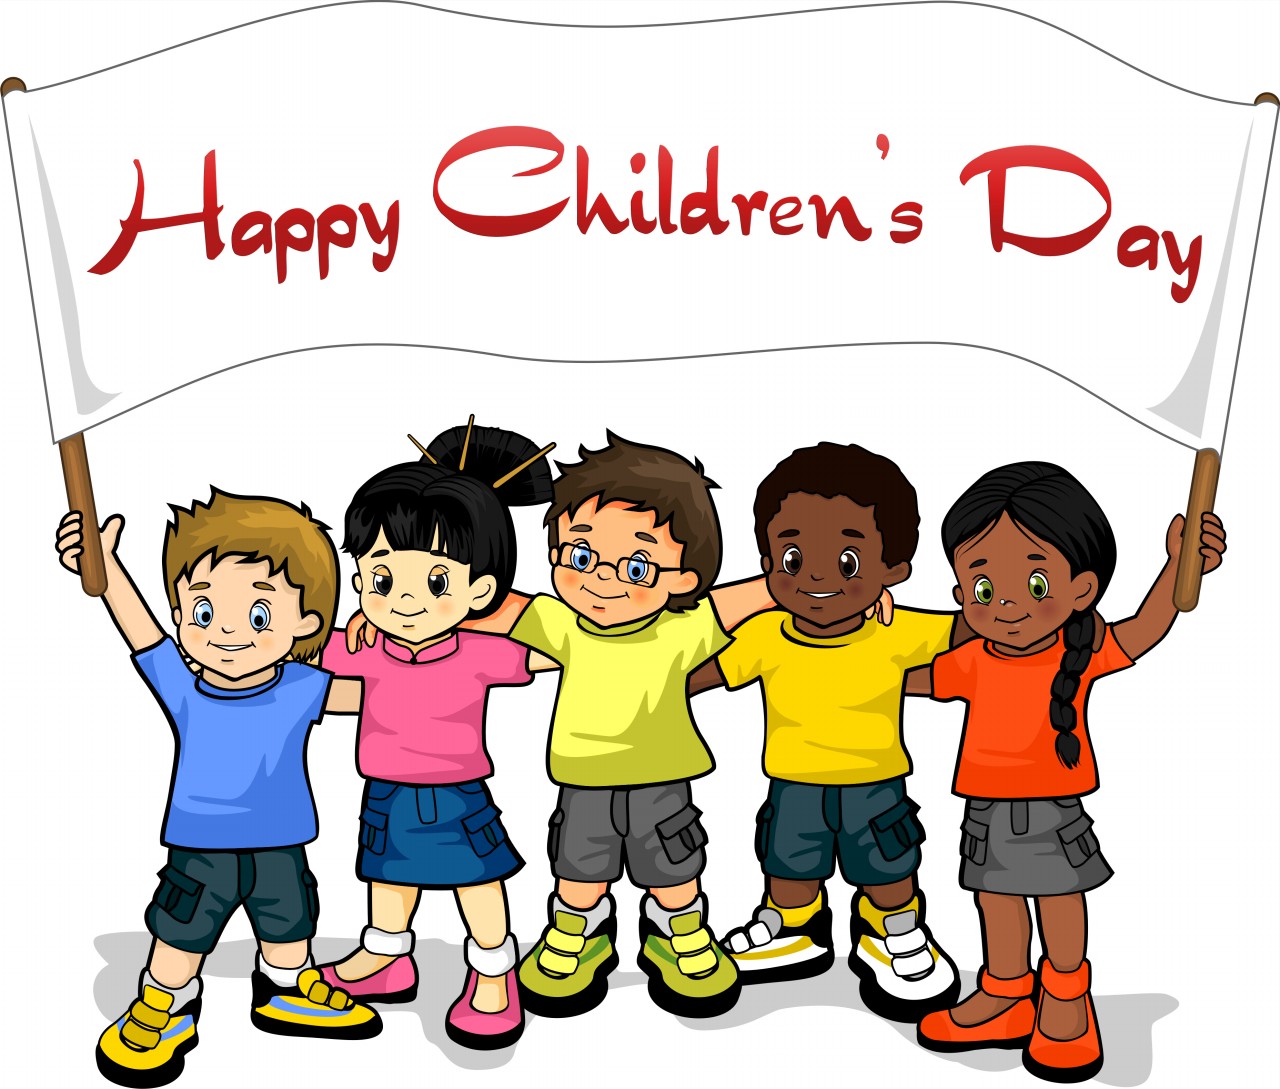 Download Childrens Day Images For Whatsapp Dp - 14 November Children's Day , HD Wallpaper & Backgrounds